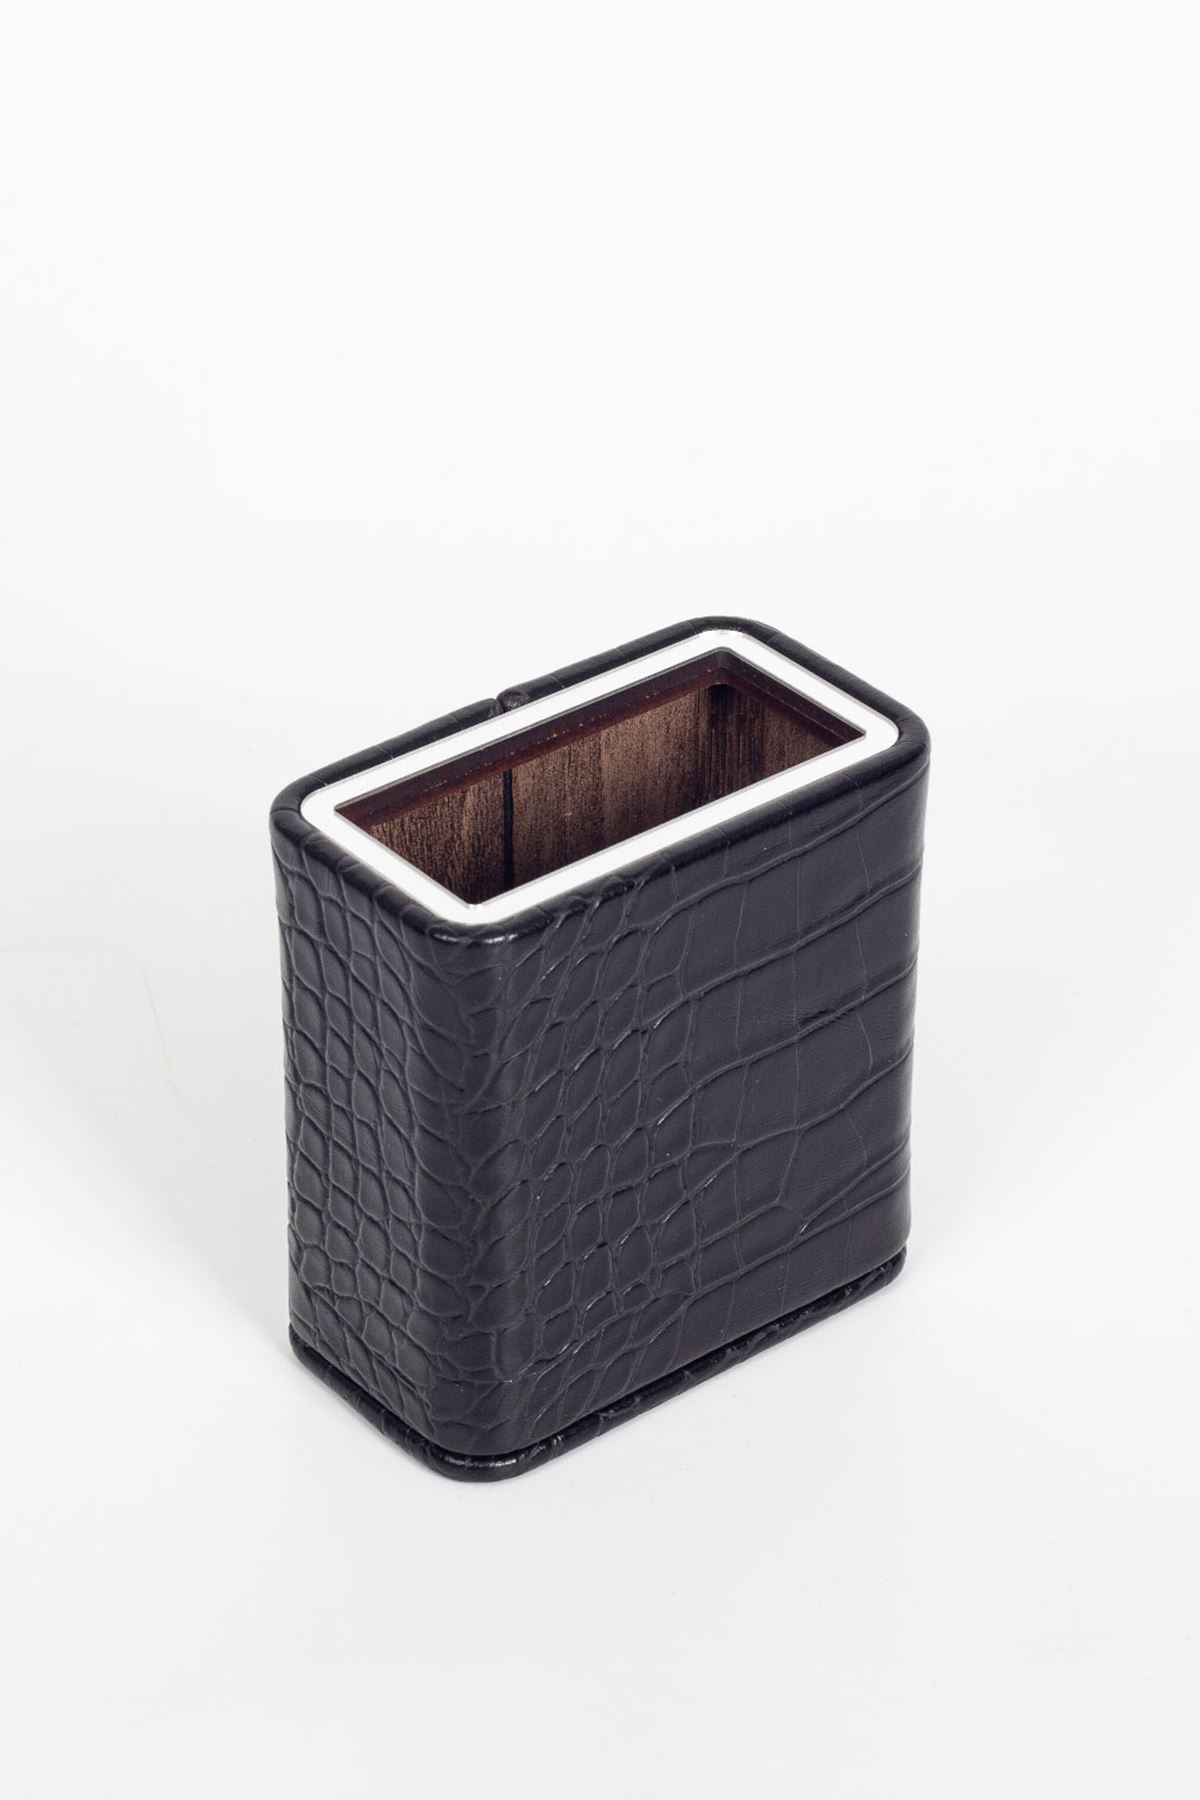 Desktop Croco Leather Pattern and Chrome Detailed Pen Holder